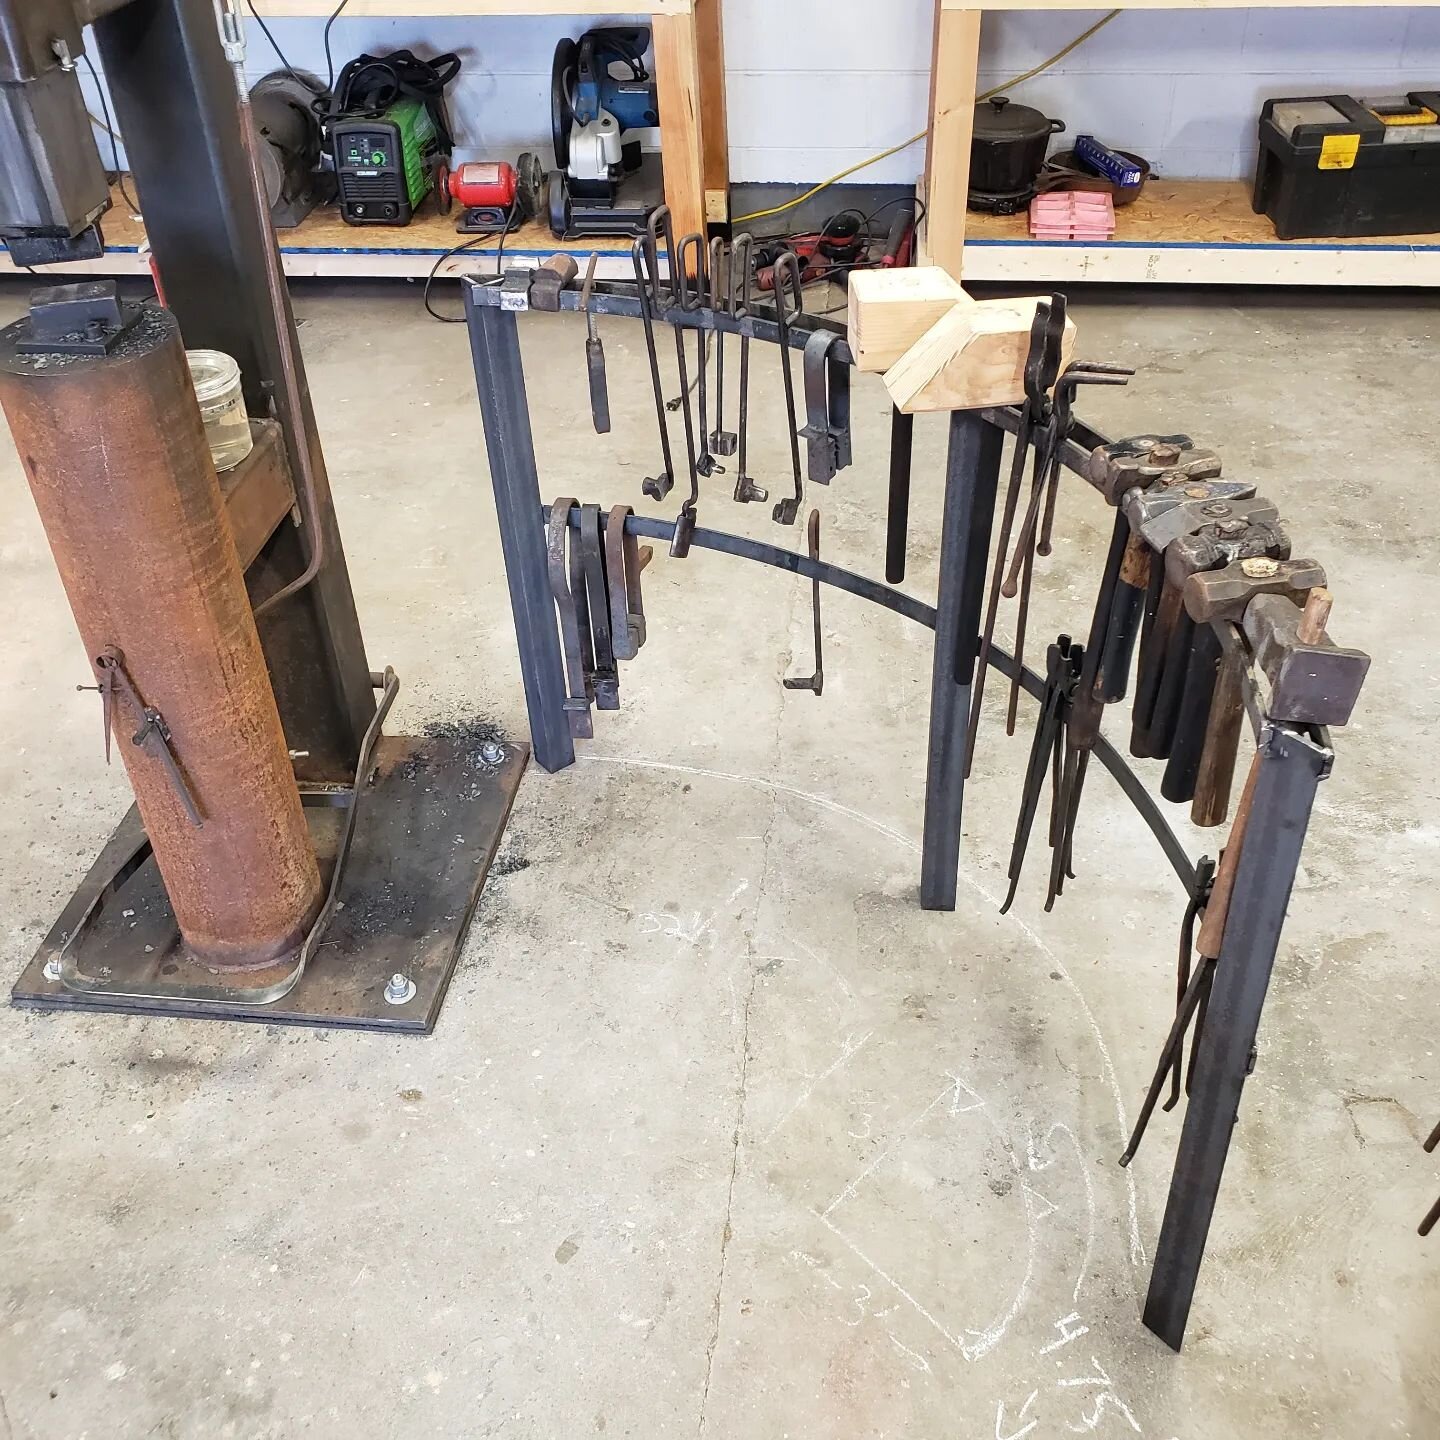 A few photos of the tool rack that came together this afternoon in shop. While not typical, it has three legs to help deal with the uneven floor. I think it is nice design that allows access to the hammer and also partitions out the space from the sh